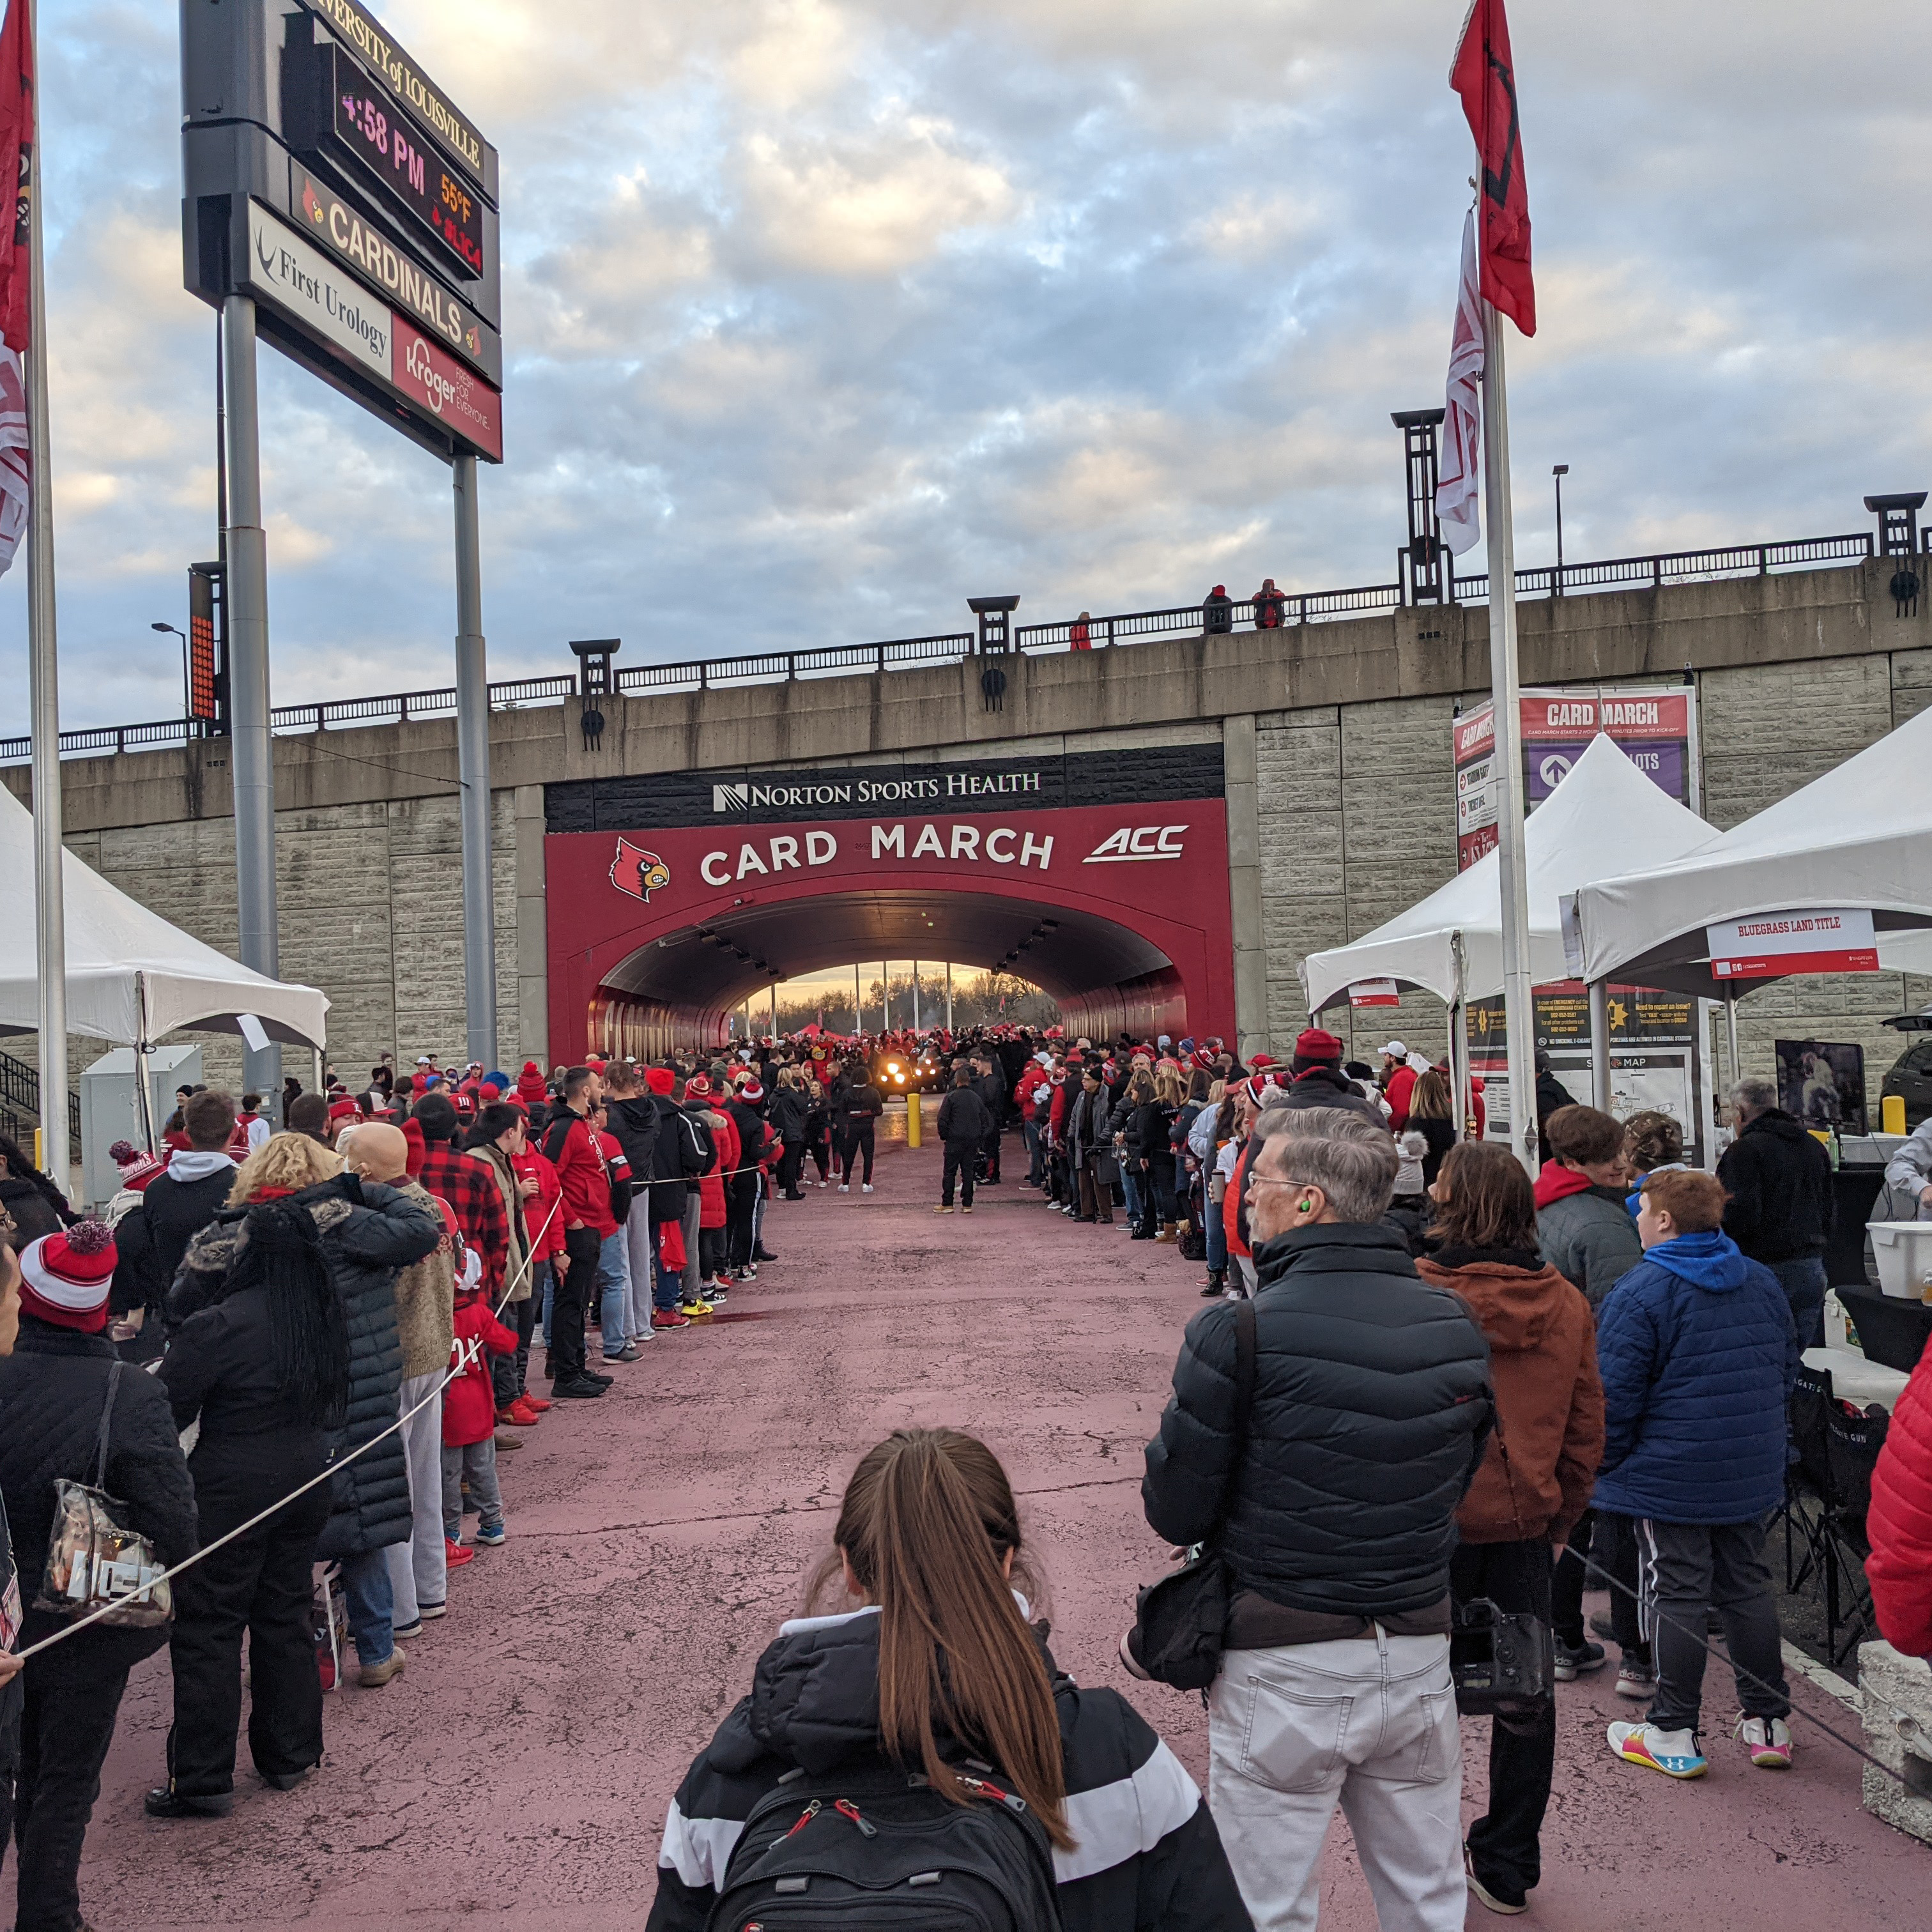 University of Louisville - UofL vs. NC State Tailgate and Football